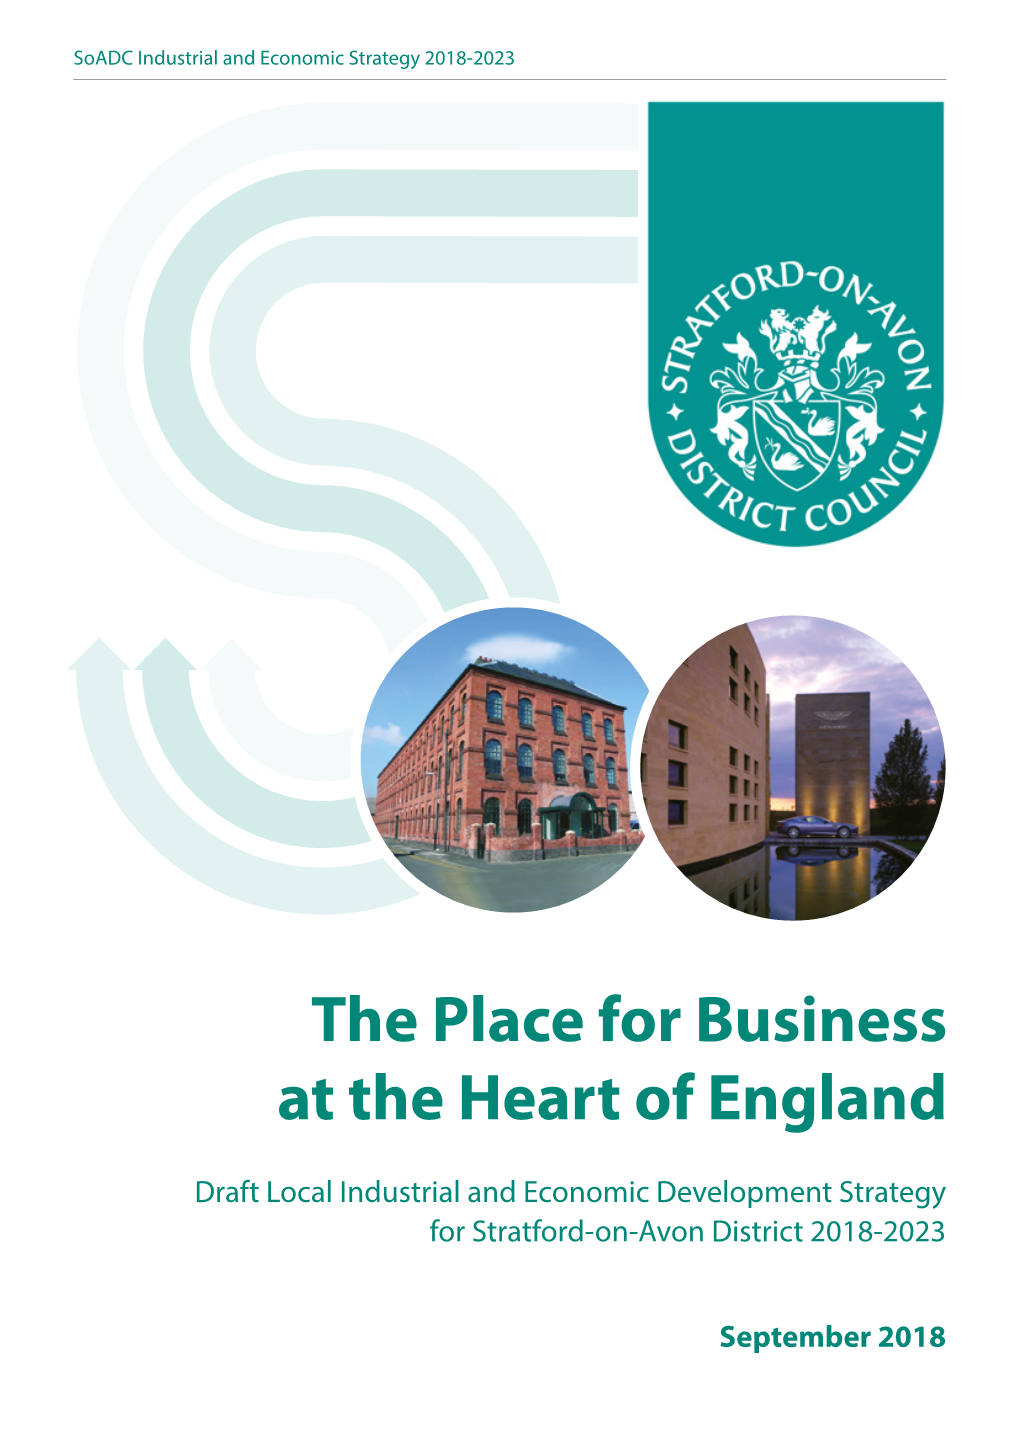 The Place for Business at the Heart of England